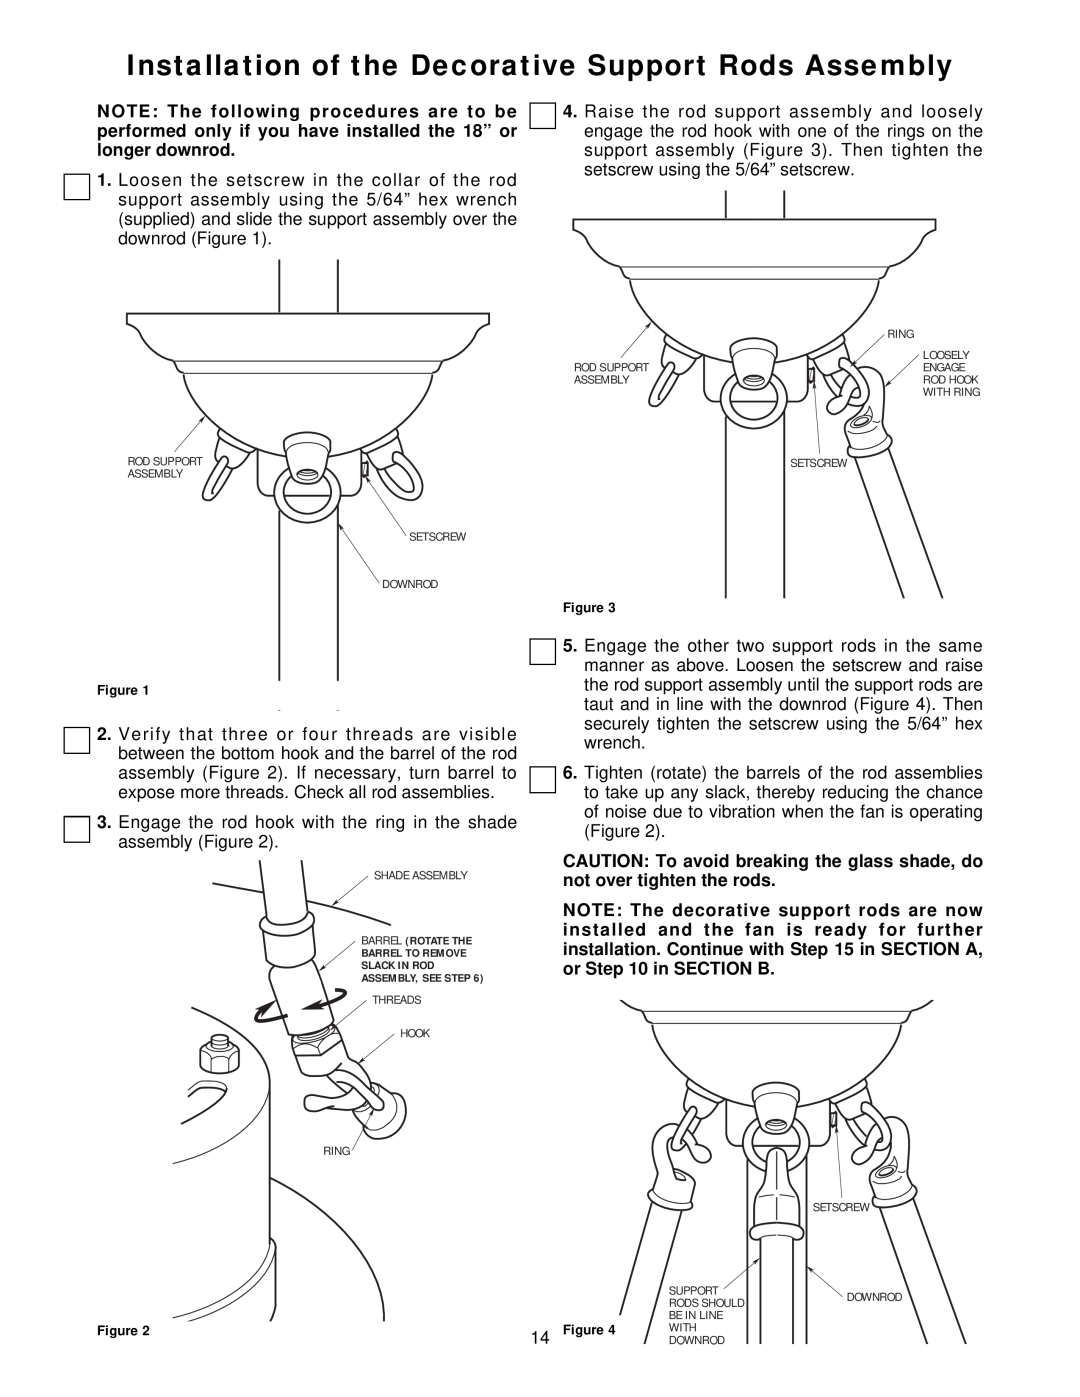 Emerson BP7251 NOTE The following procedures are to be performed only if you have installed the 18” or longer downrod 